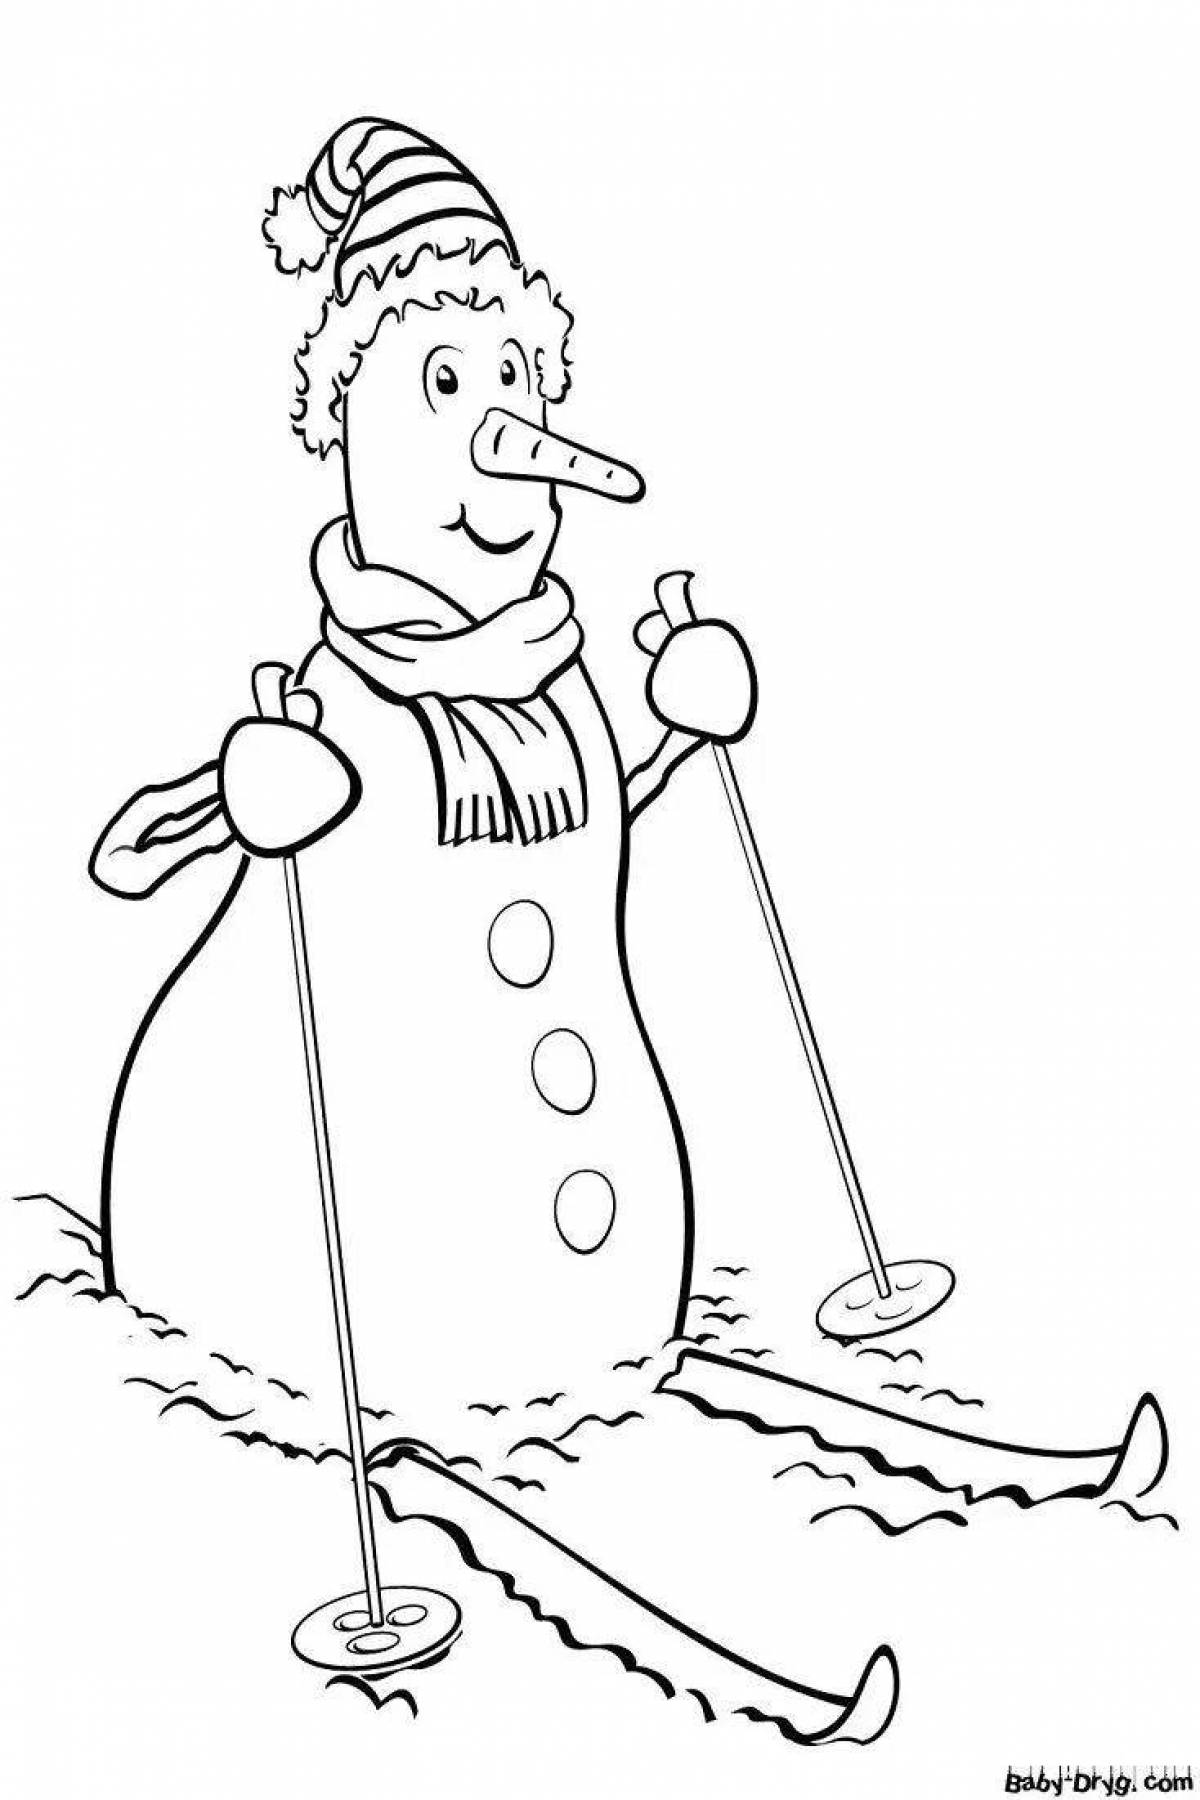 Shiny coloring book snowman on skates